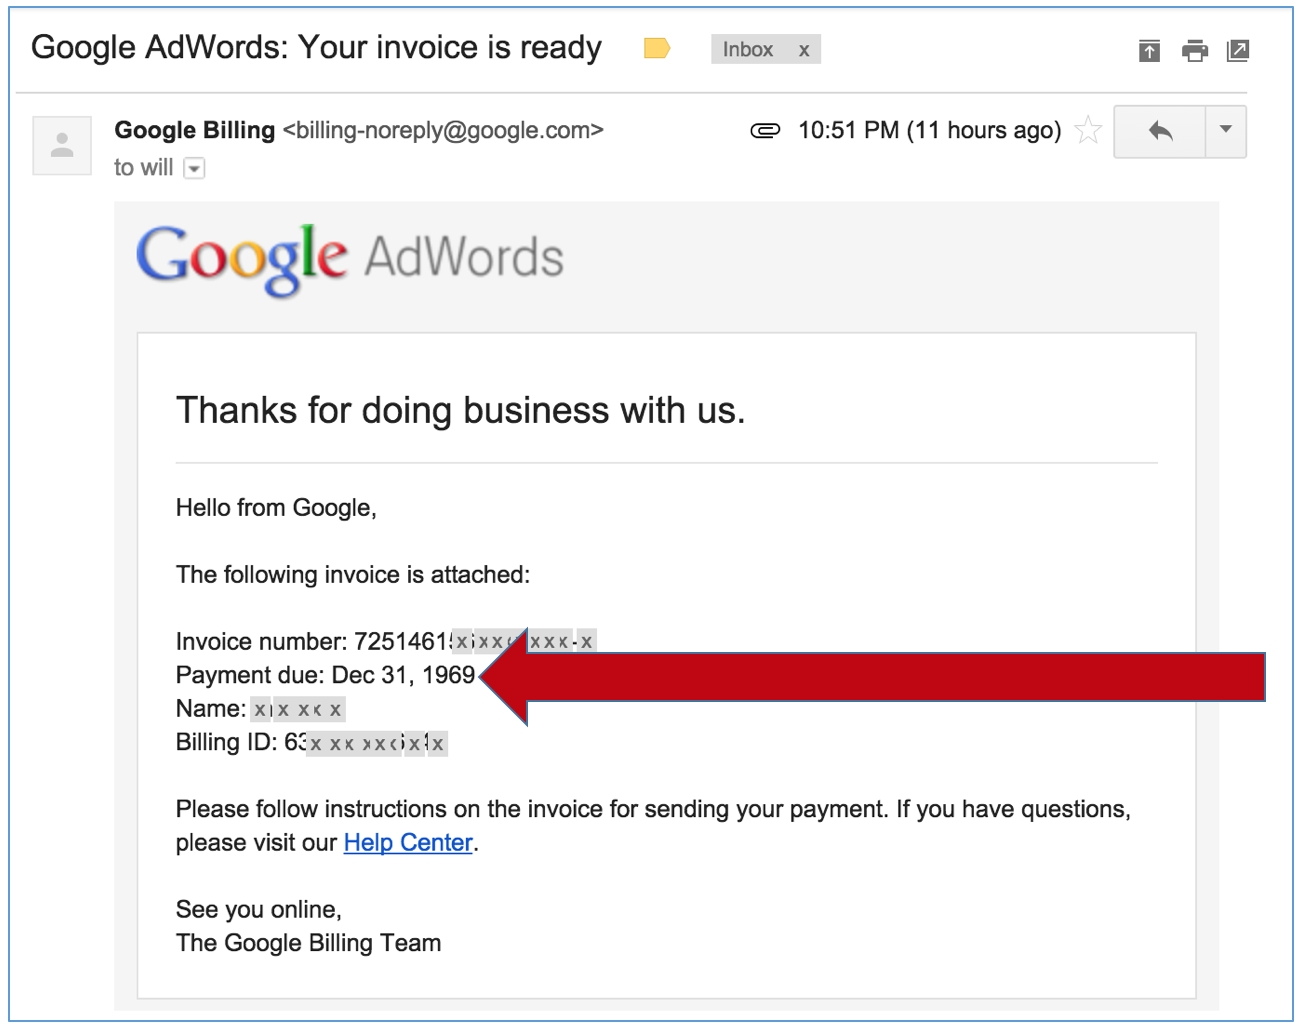 a minor bug in google adwords will marlow agency google adwords invoice pic